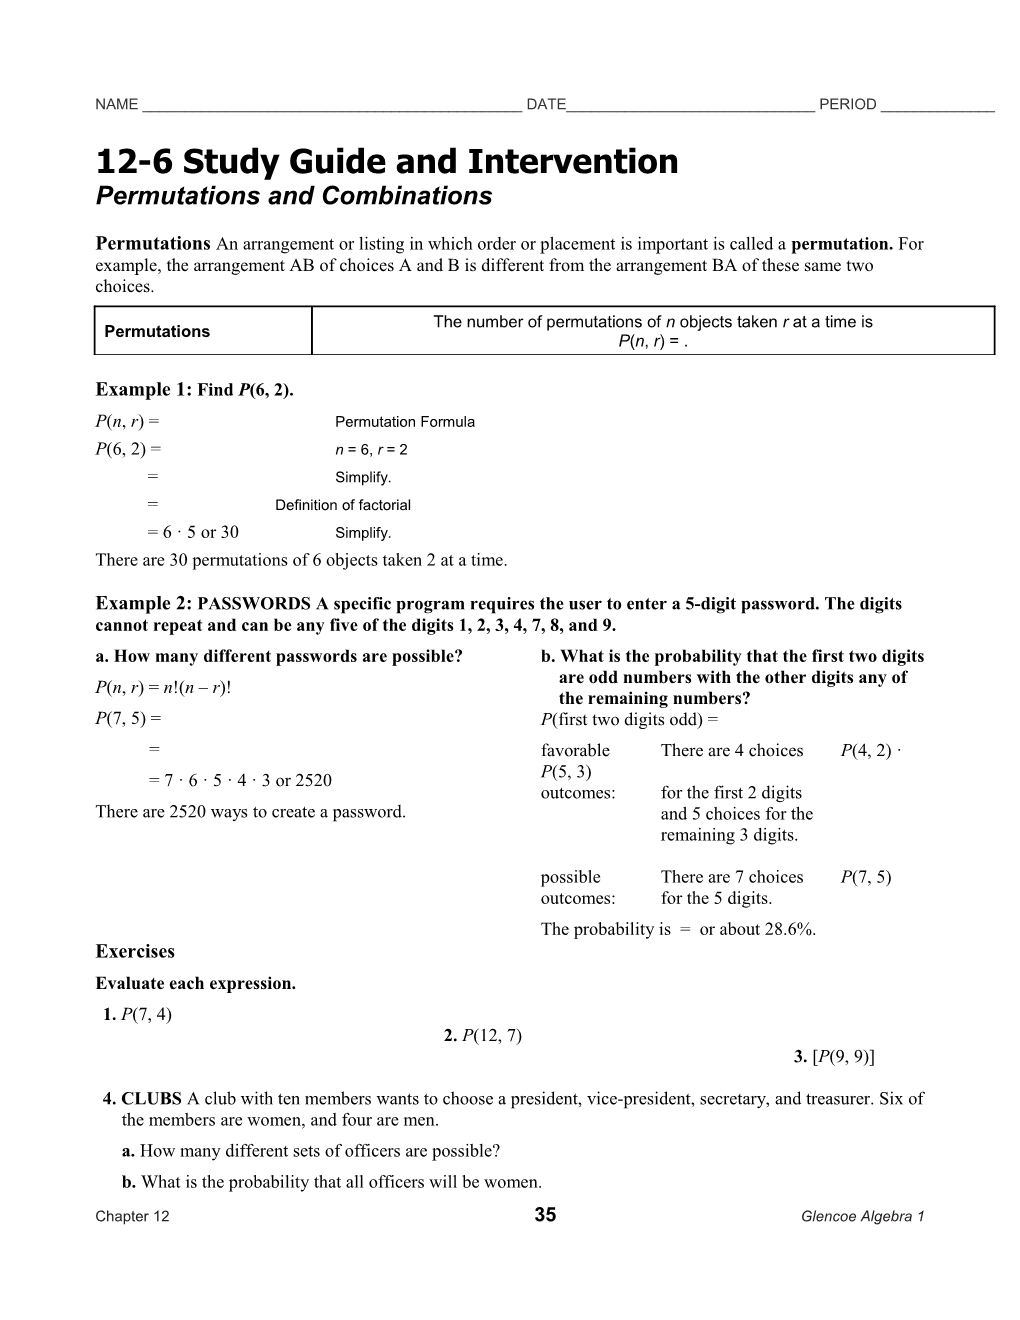 12-6 Study Guide and Intervention